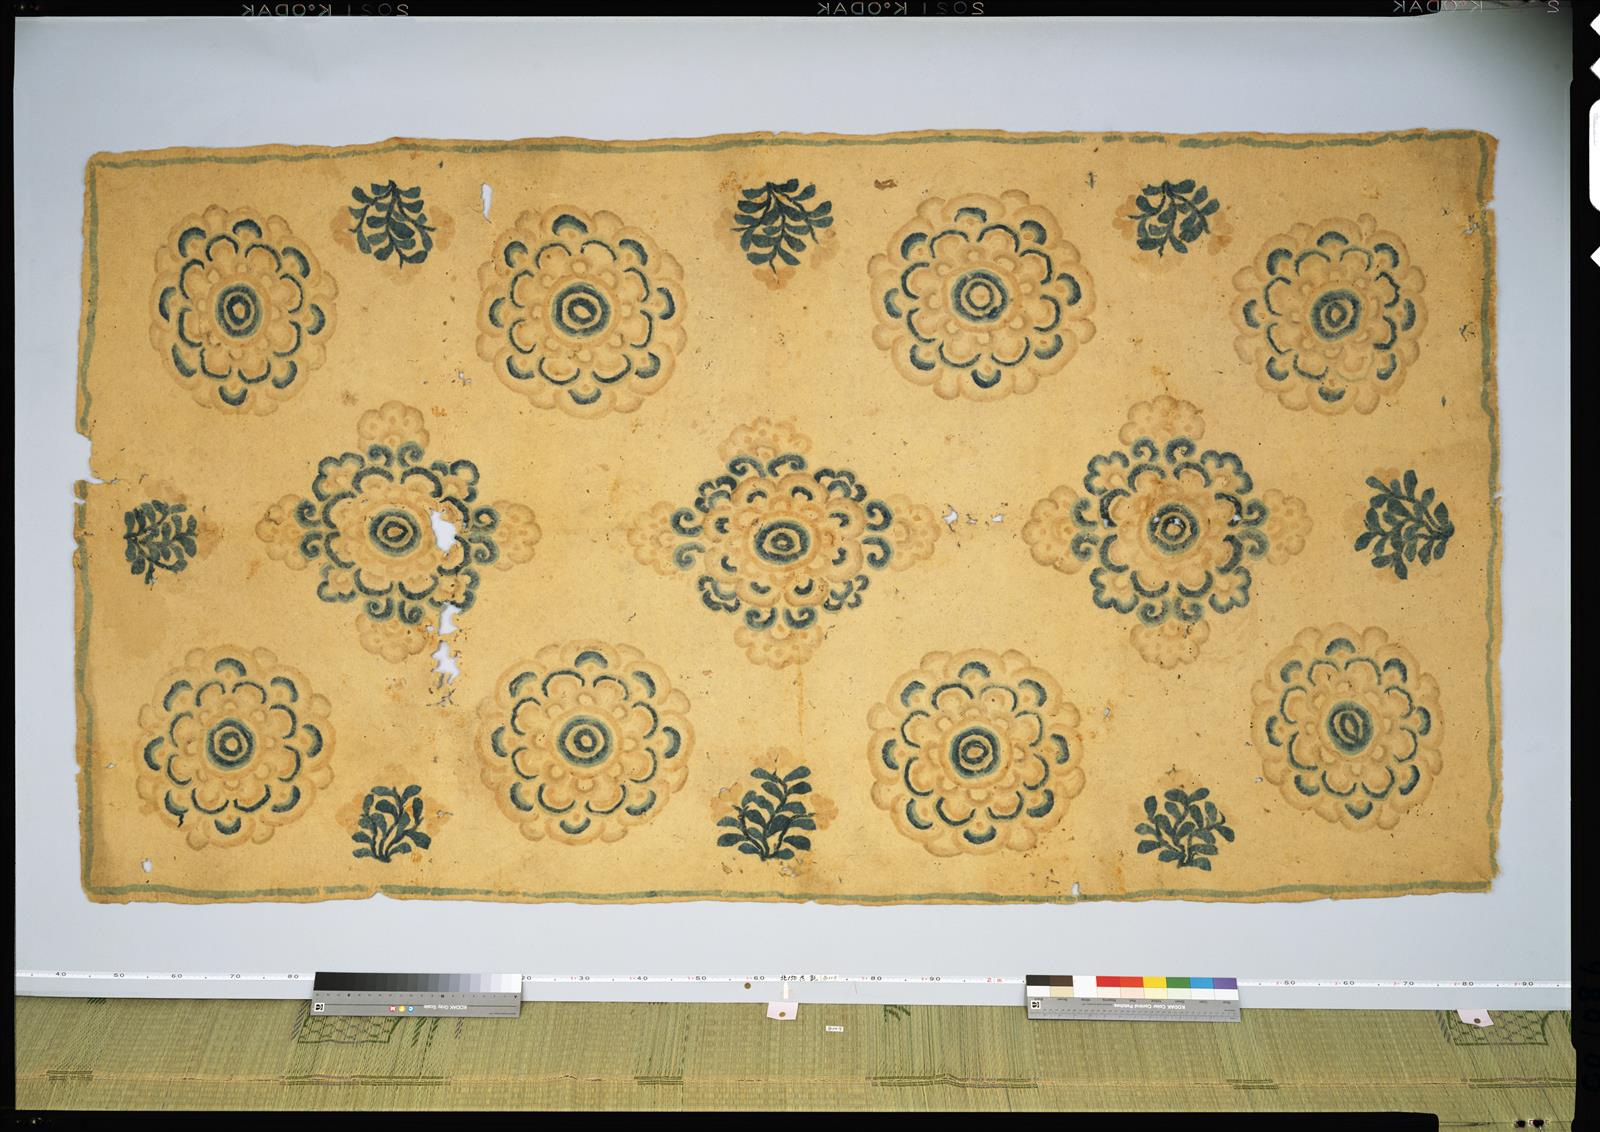 Felt rug with floral designs, No. 11. - Shosoin